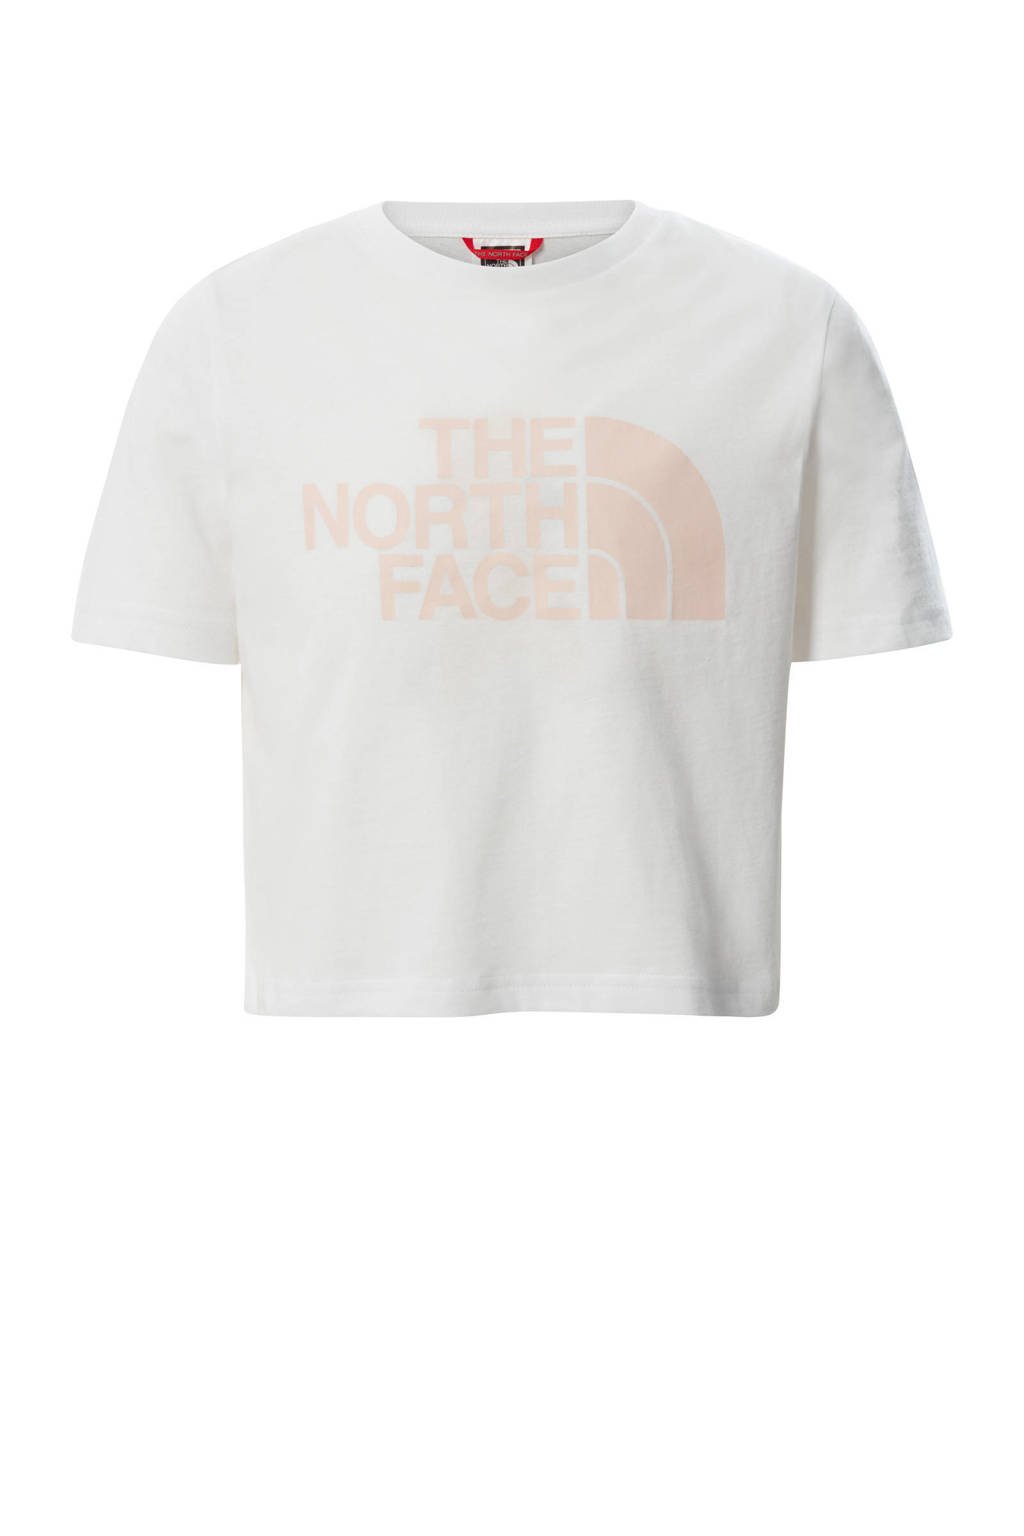 The North Face cropped T-shirt Easy met logo wit/lichtroze, Wit/lichtroze